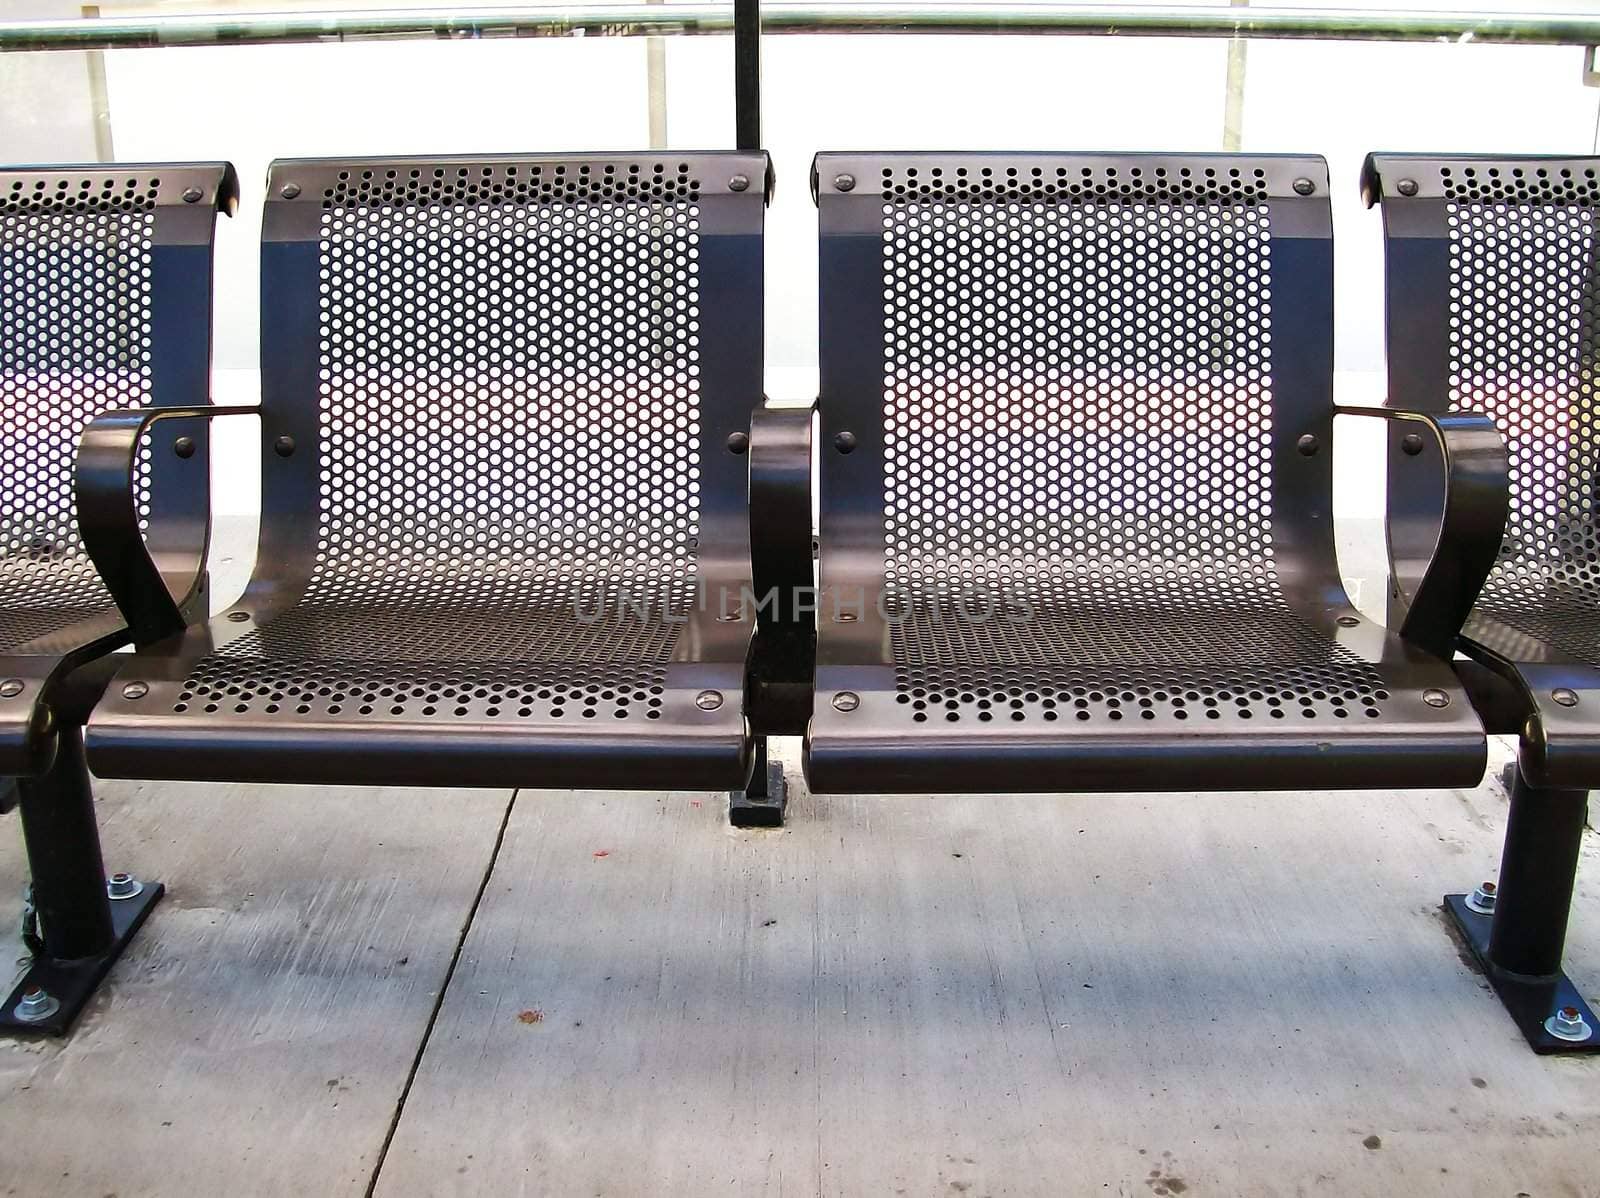 Iron seating at a train stop.